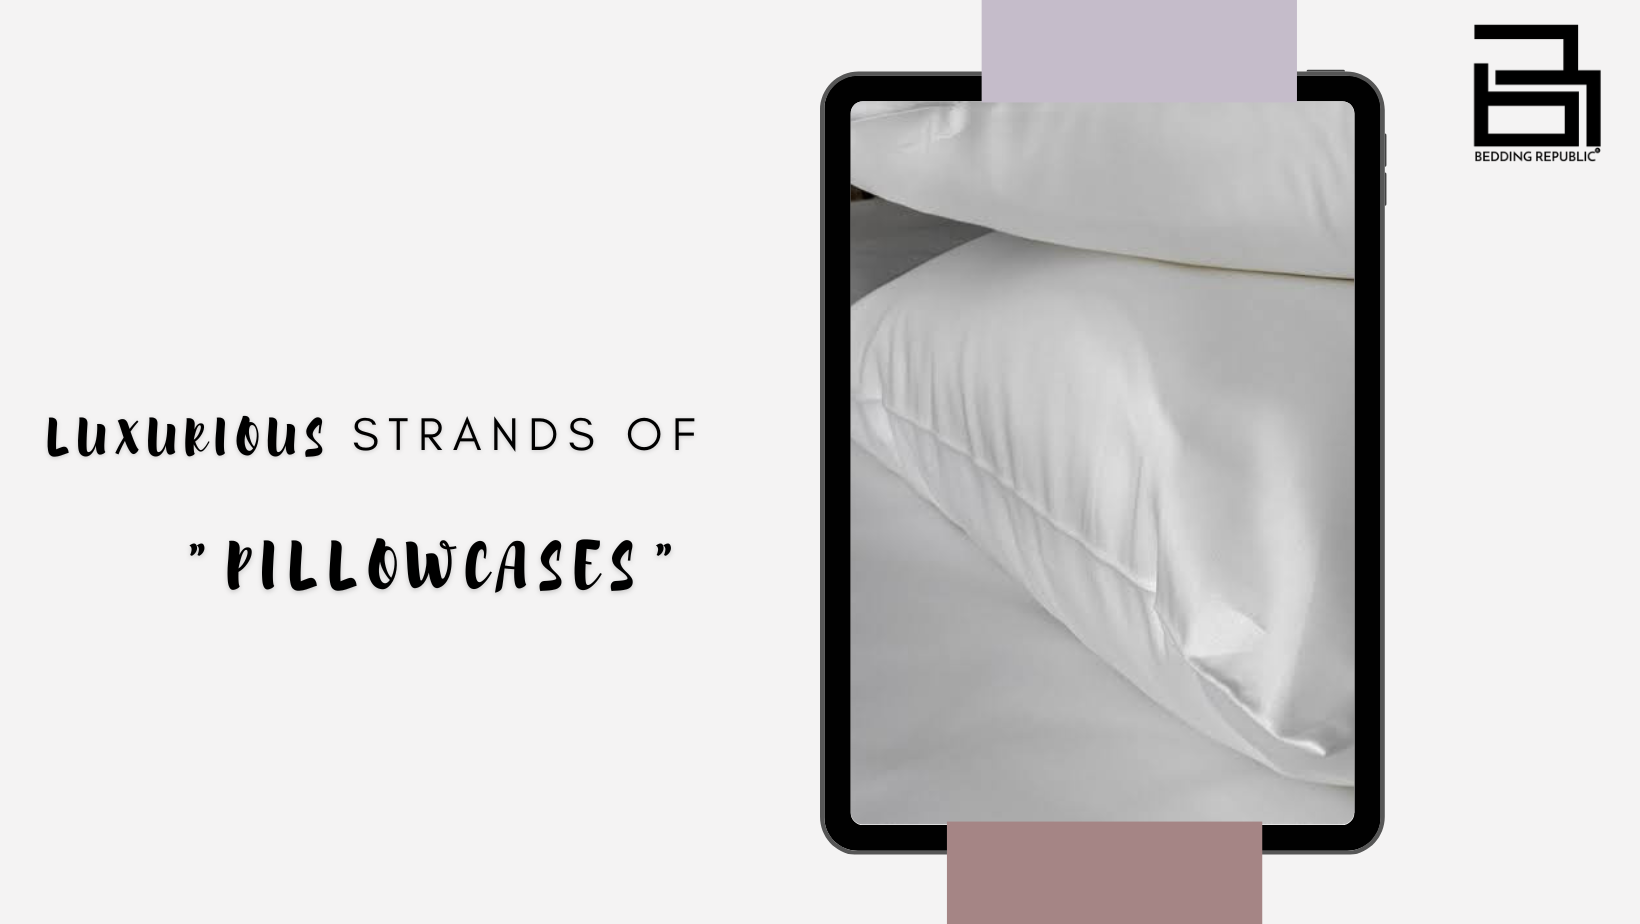 You are currently viewing Benefits of Sleeping on Luxurious Strands Of Pillowcases